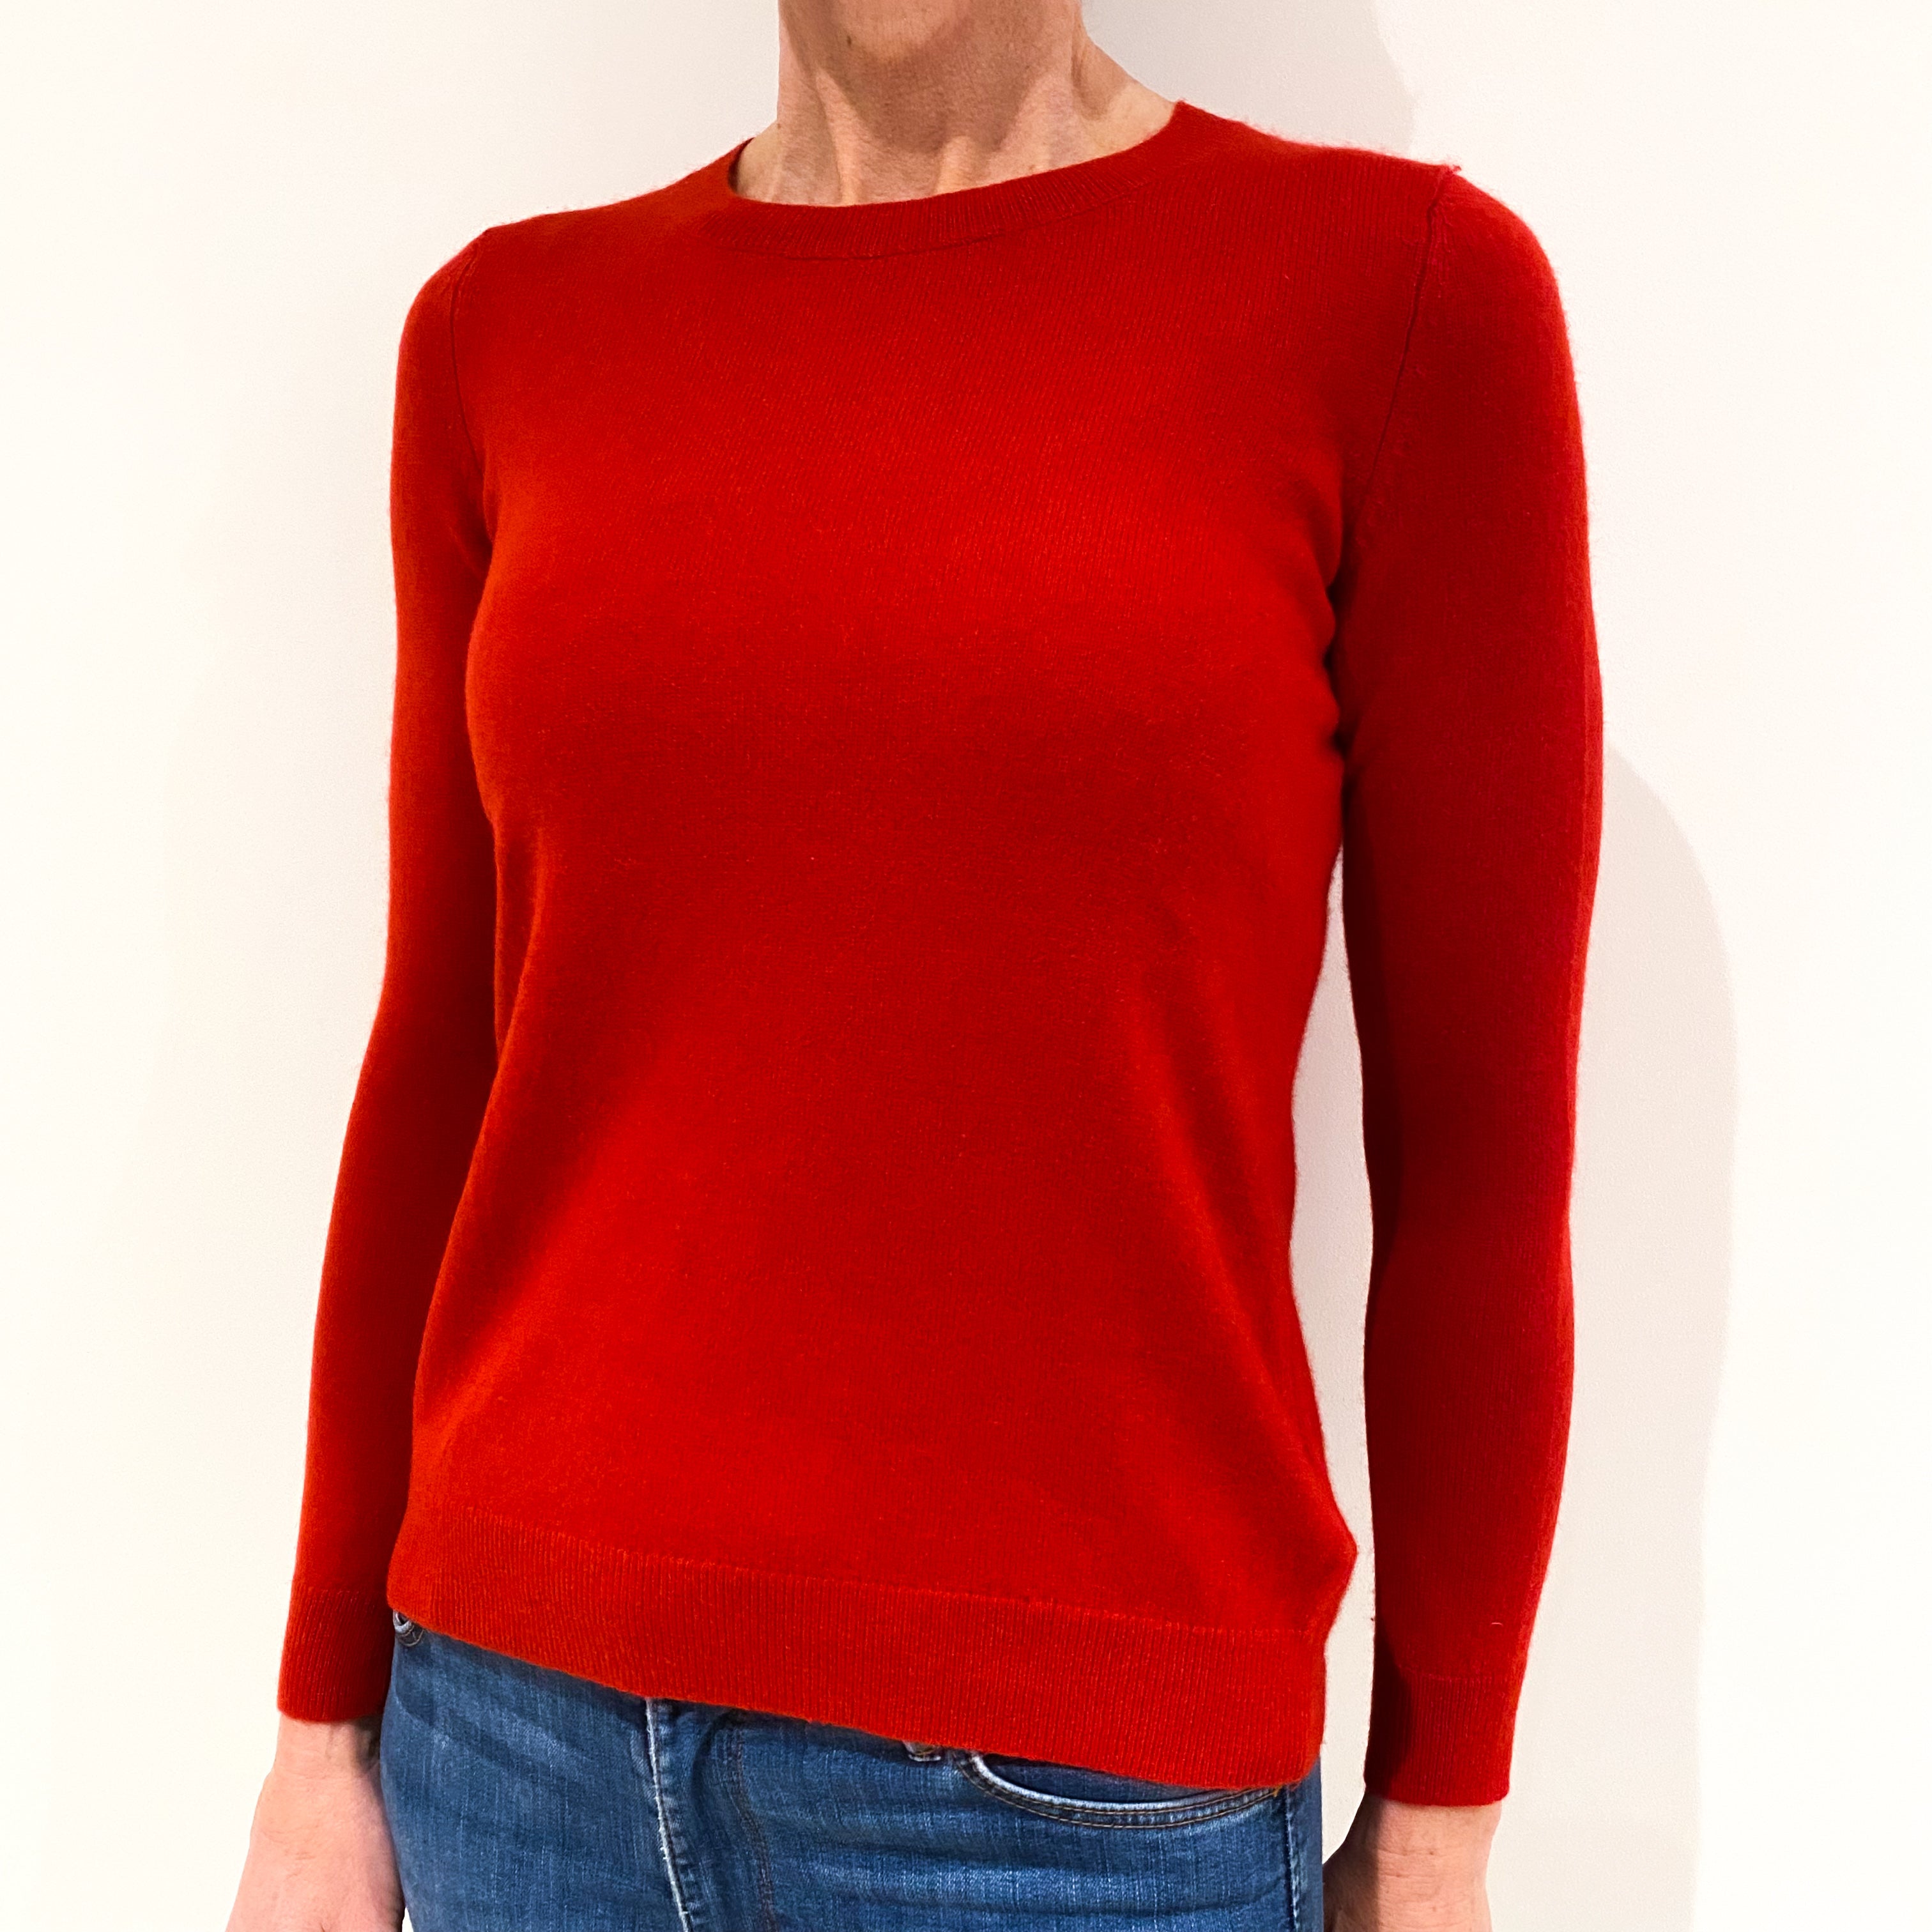 Scarlet Red Cashmere Crew Neck Jumper Small Petite